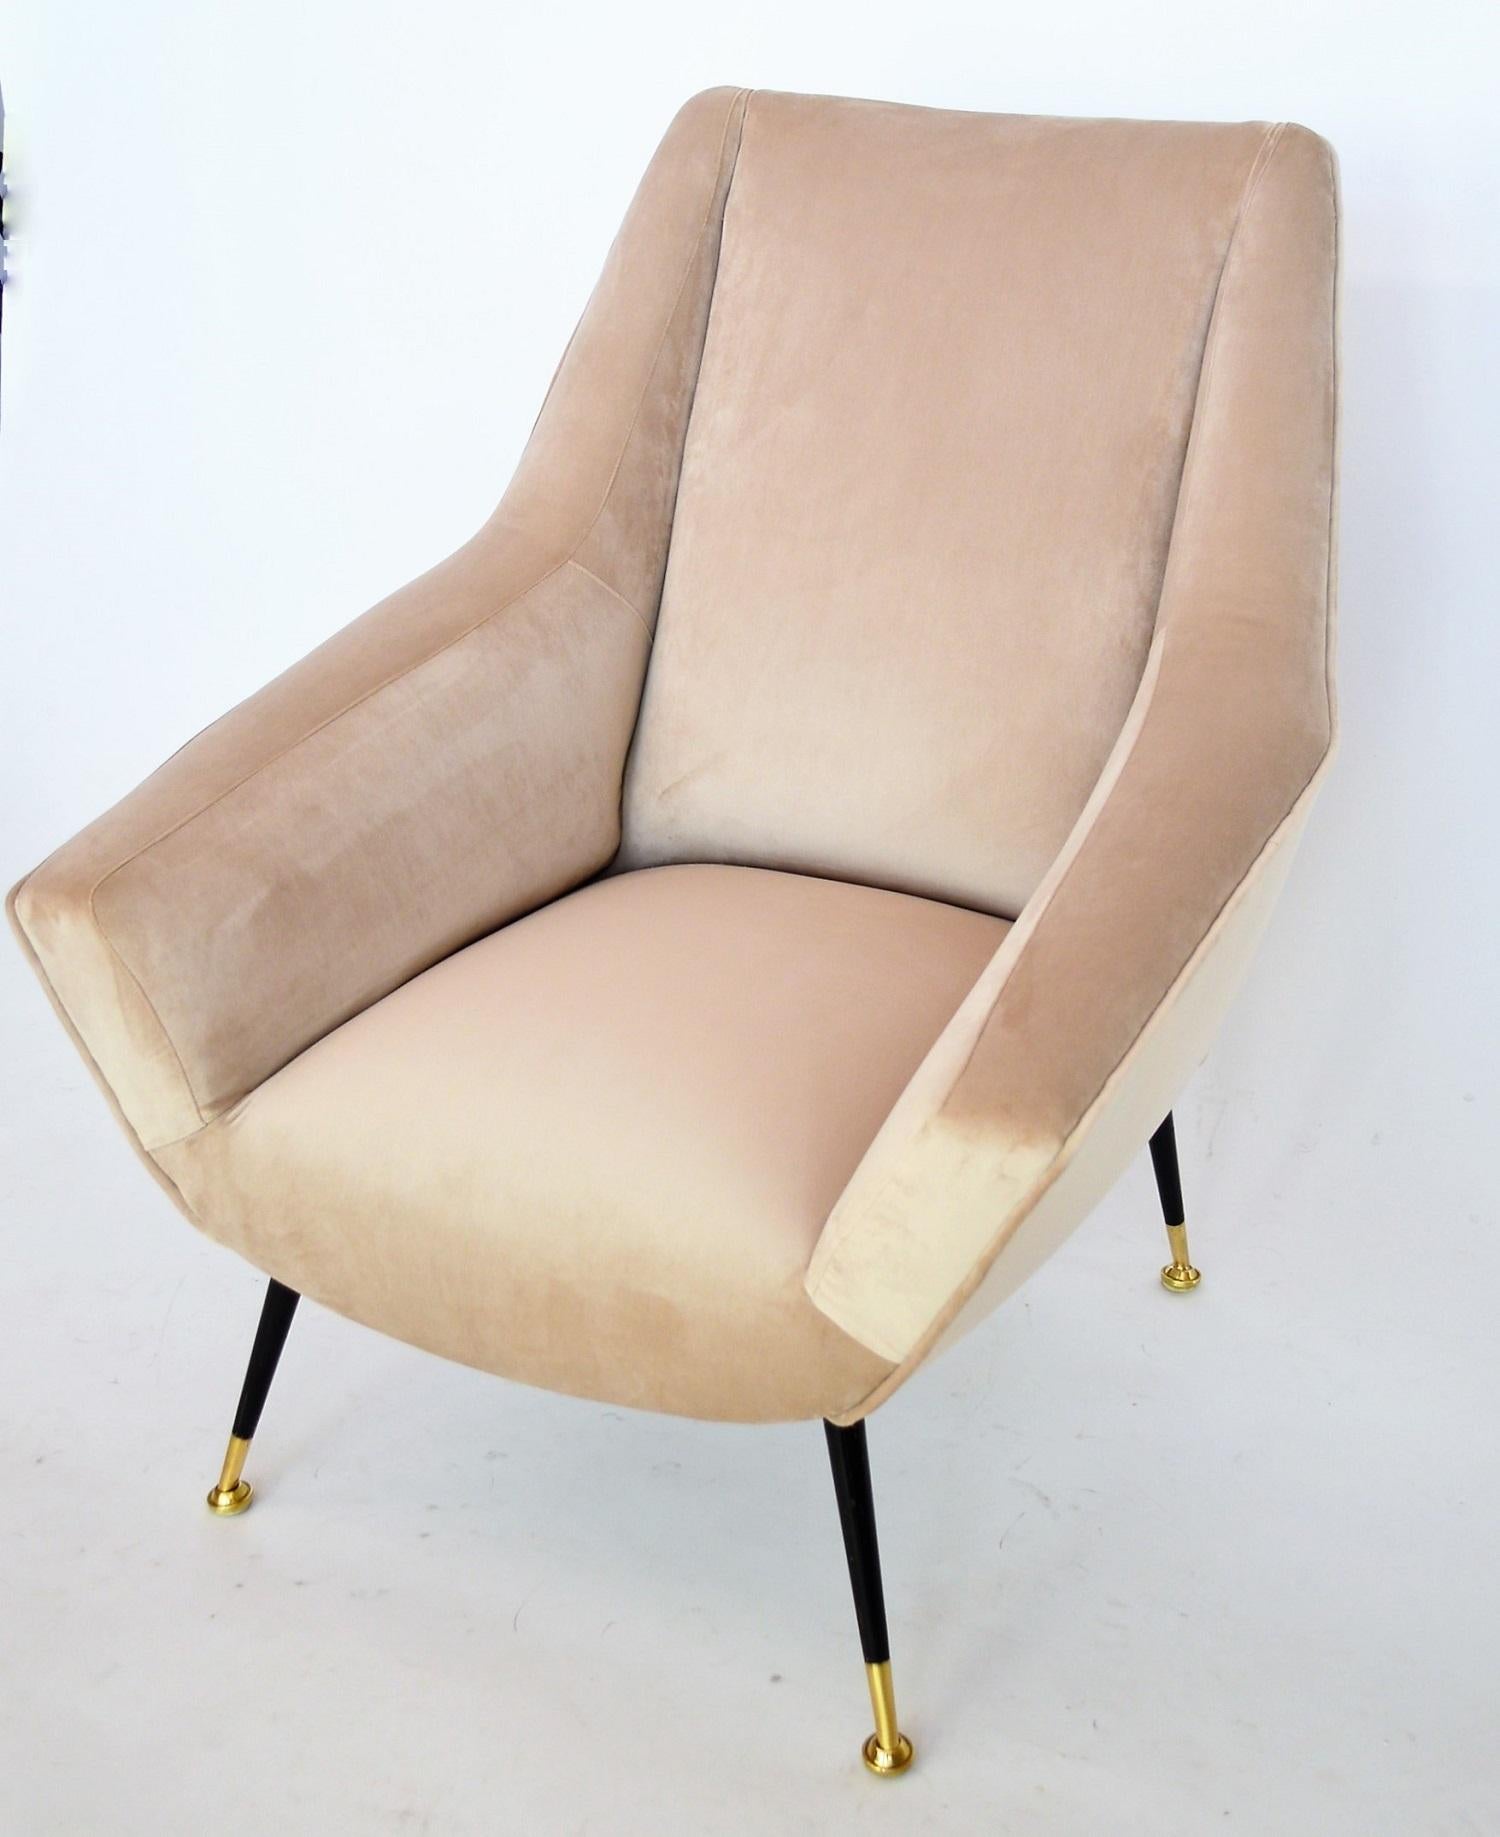 Beautiful and elegant Italian vintage armchair, original from the 1950s.
The armchair have been restored completely internally with high quality material and reupholstered with taupe colored soft velvet fabric of Italian manufacturing.
Legs are